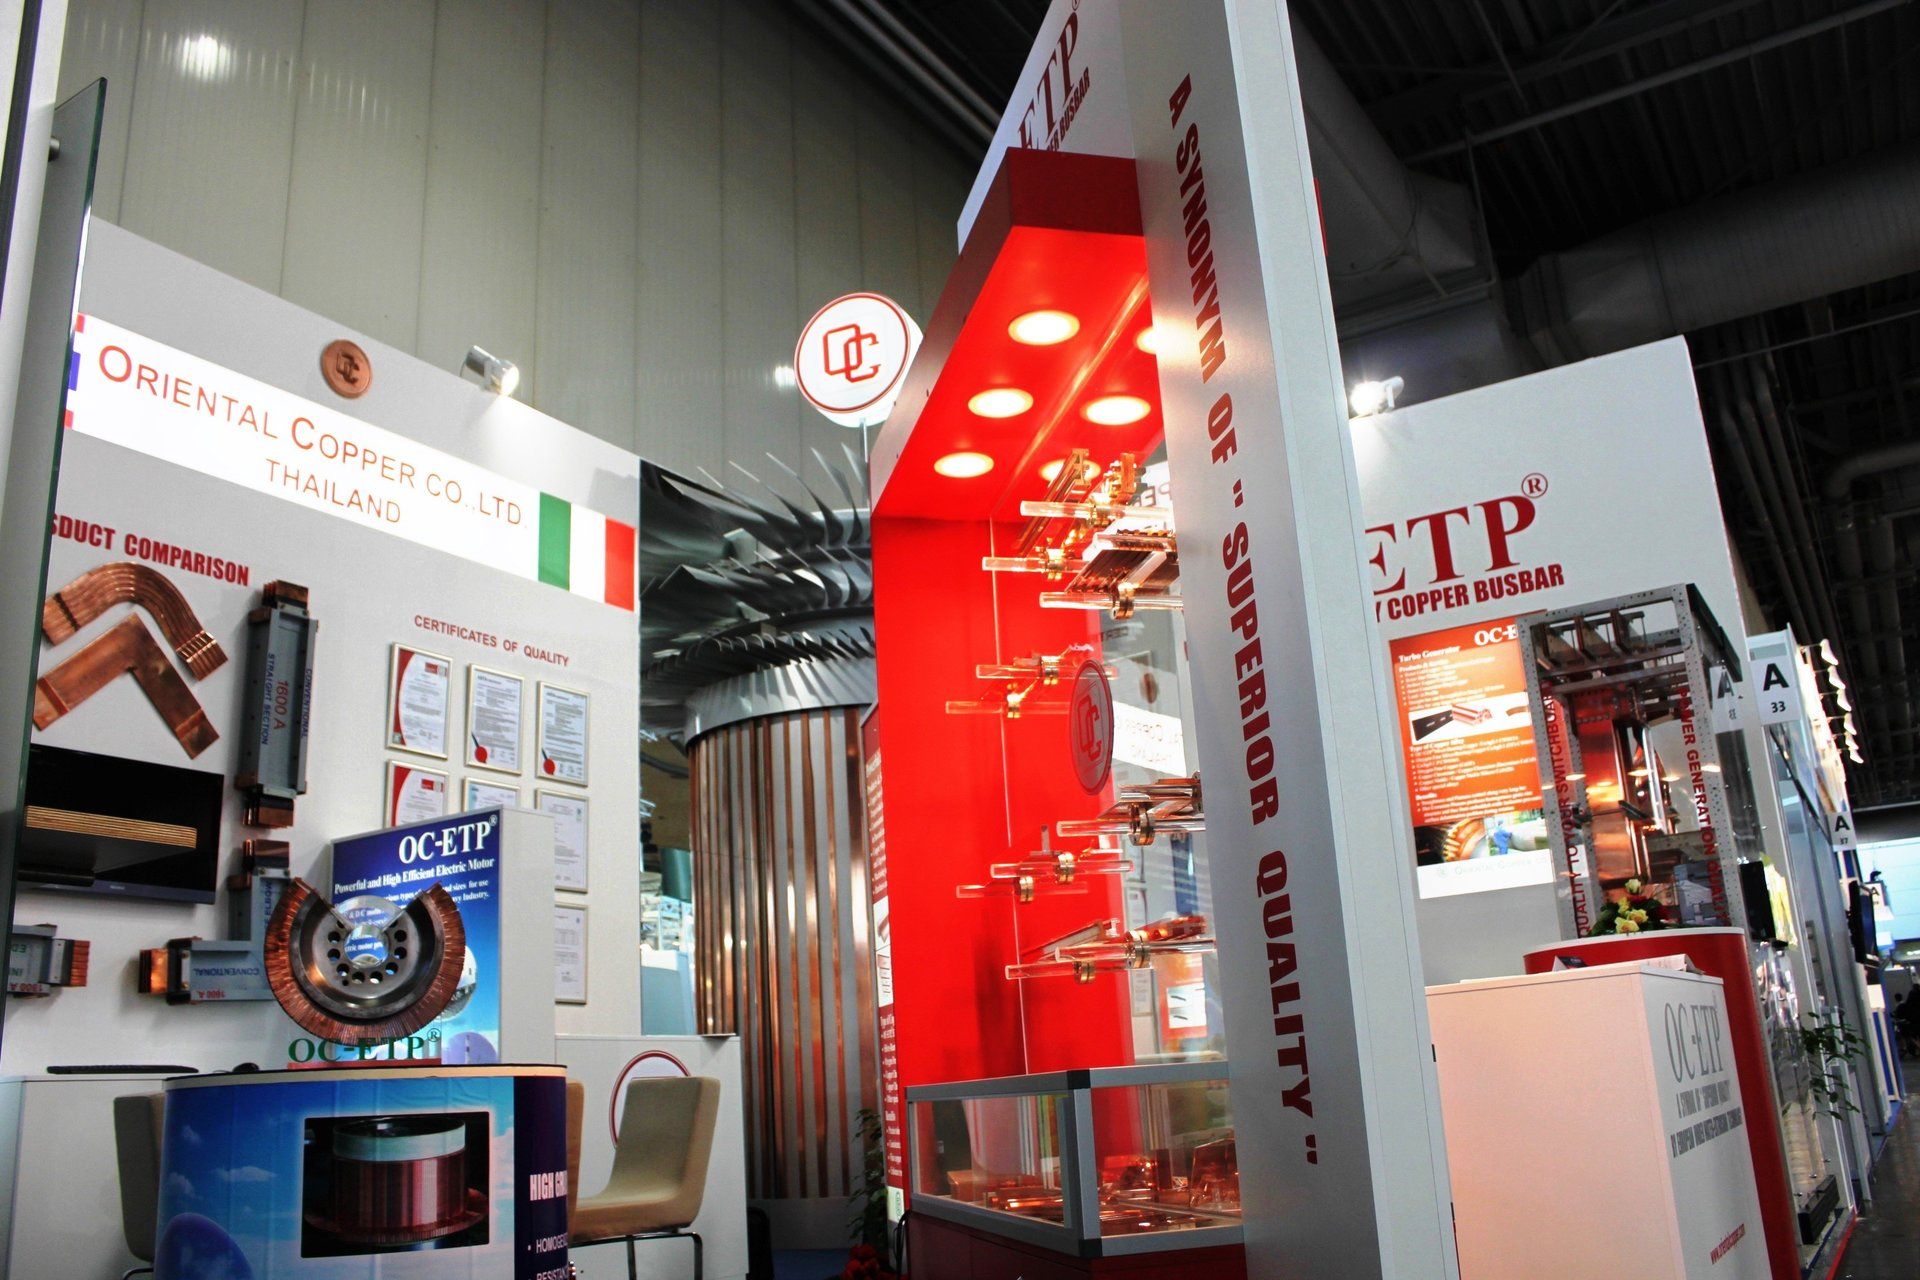 Oriental Copper @ Hannover Messe 2011. Booth designed and built by Essential Global Fairs.